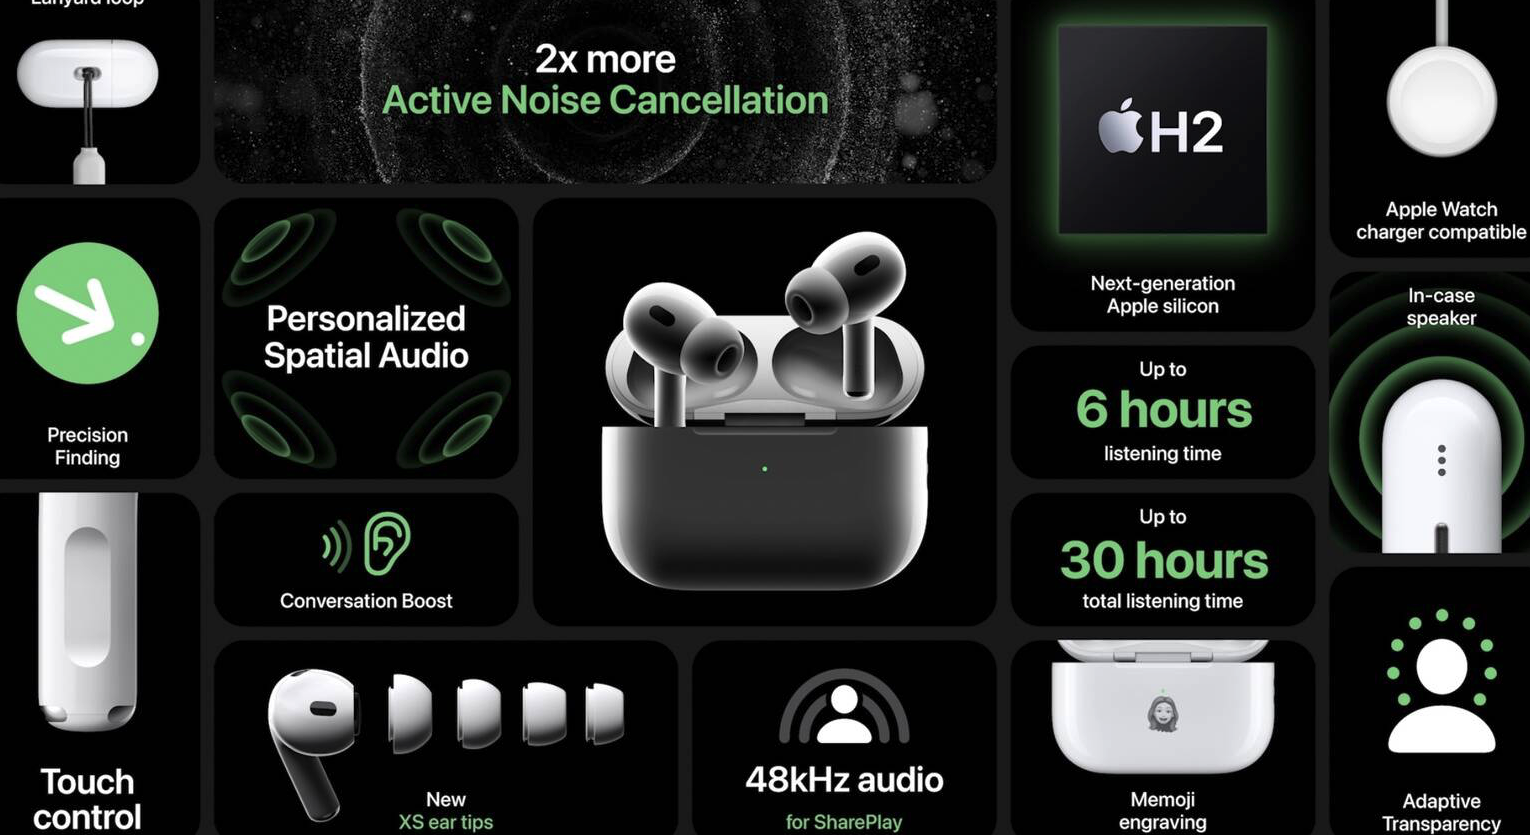 Rock Out With Apple's New AirPods Pro